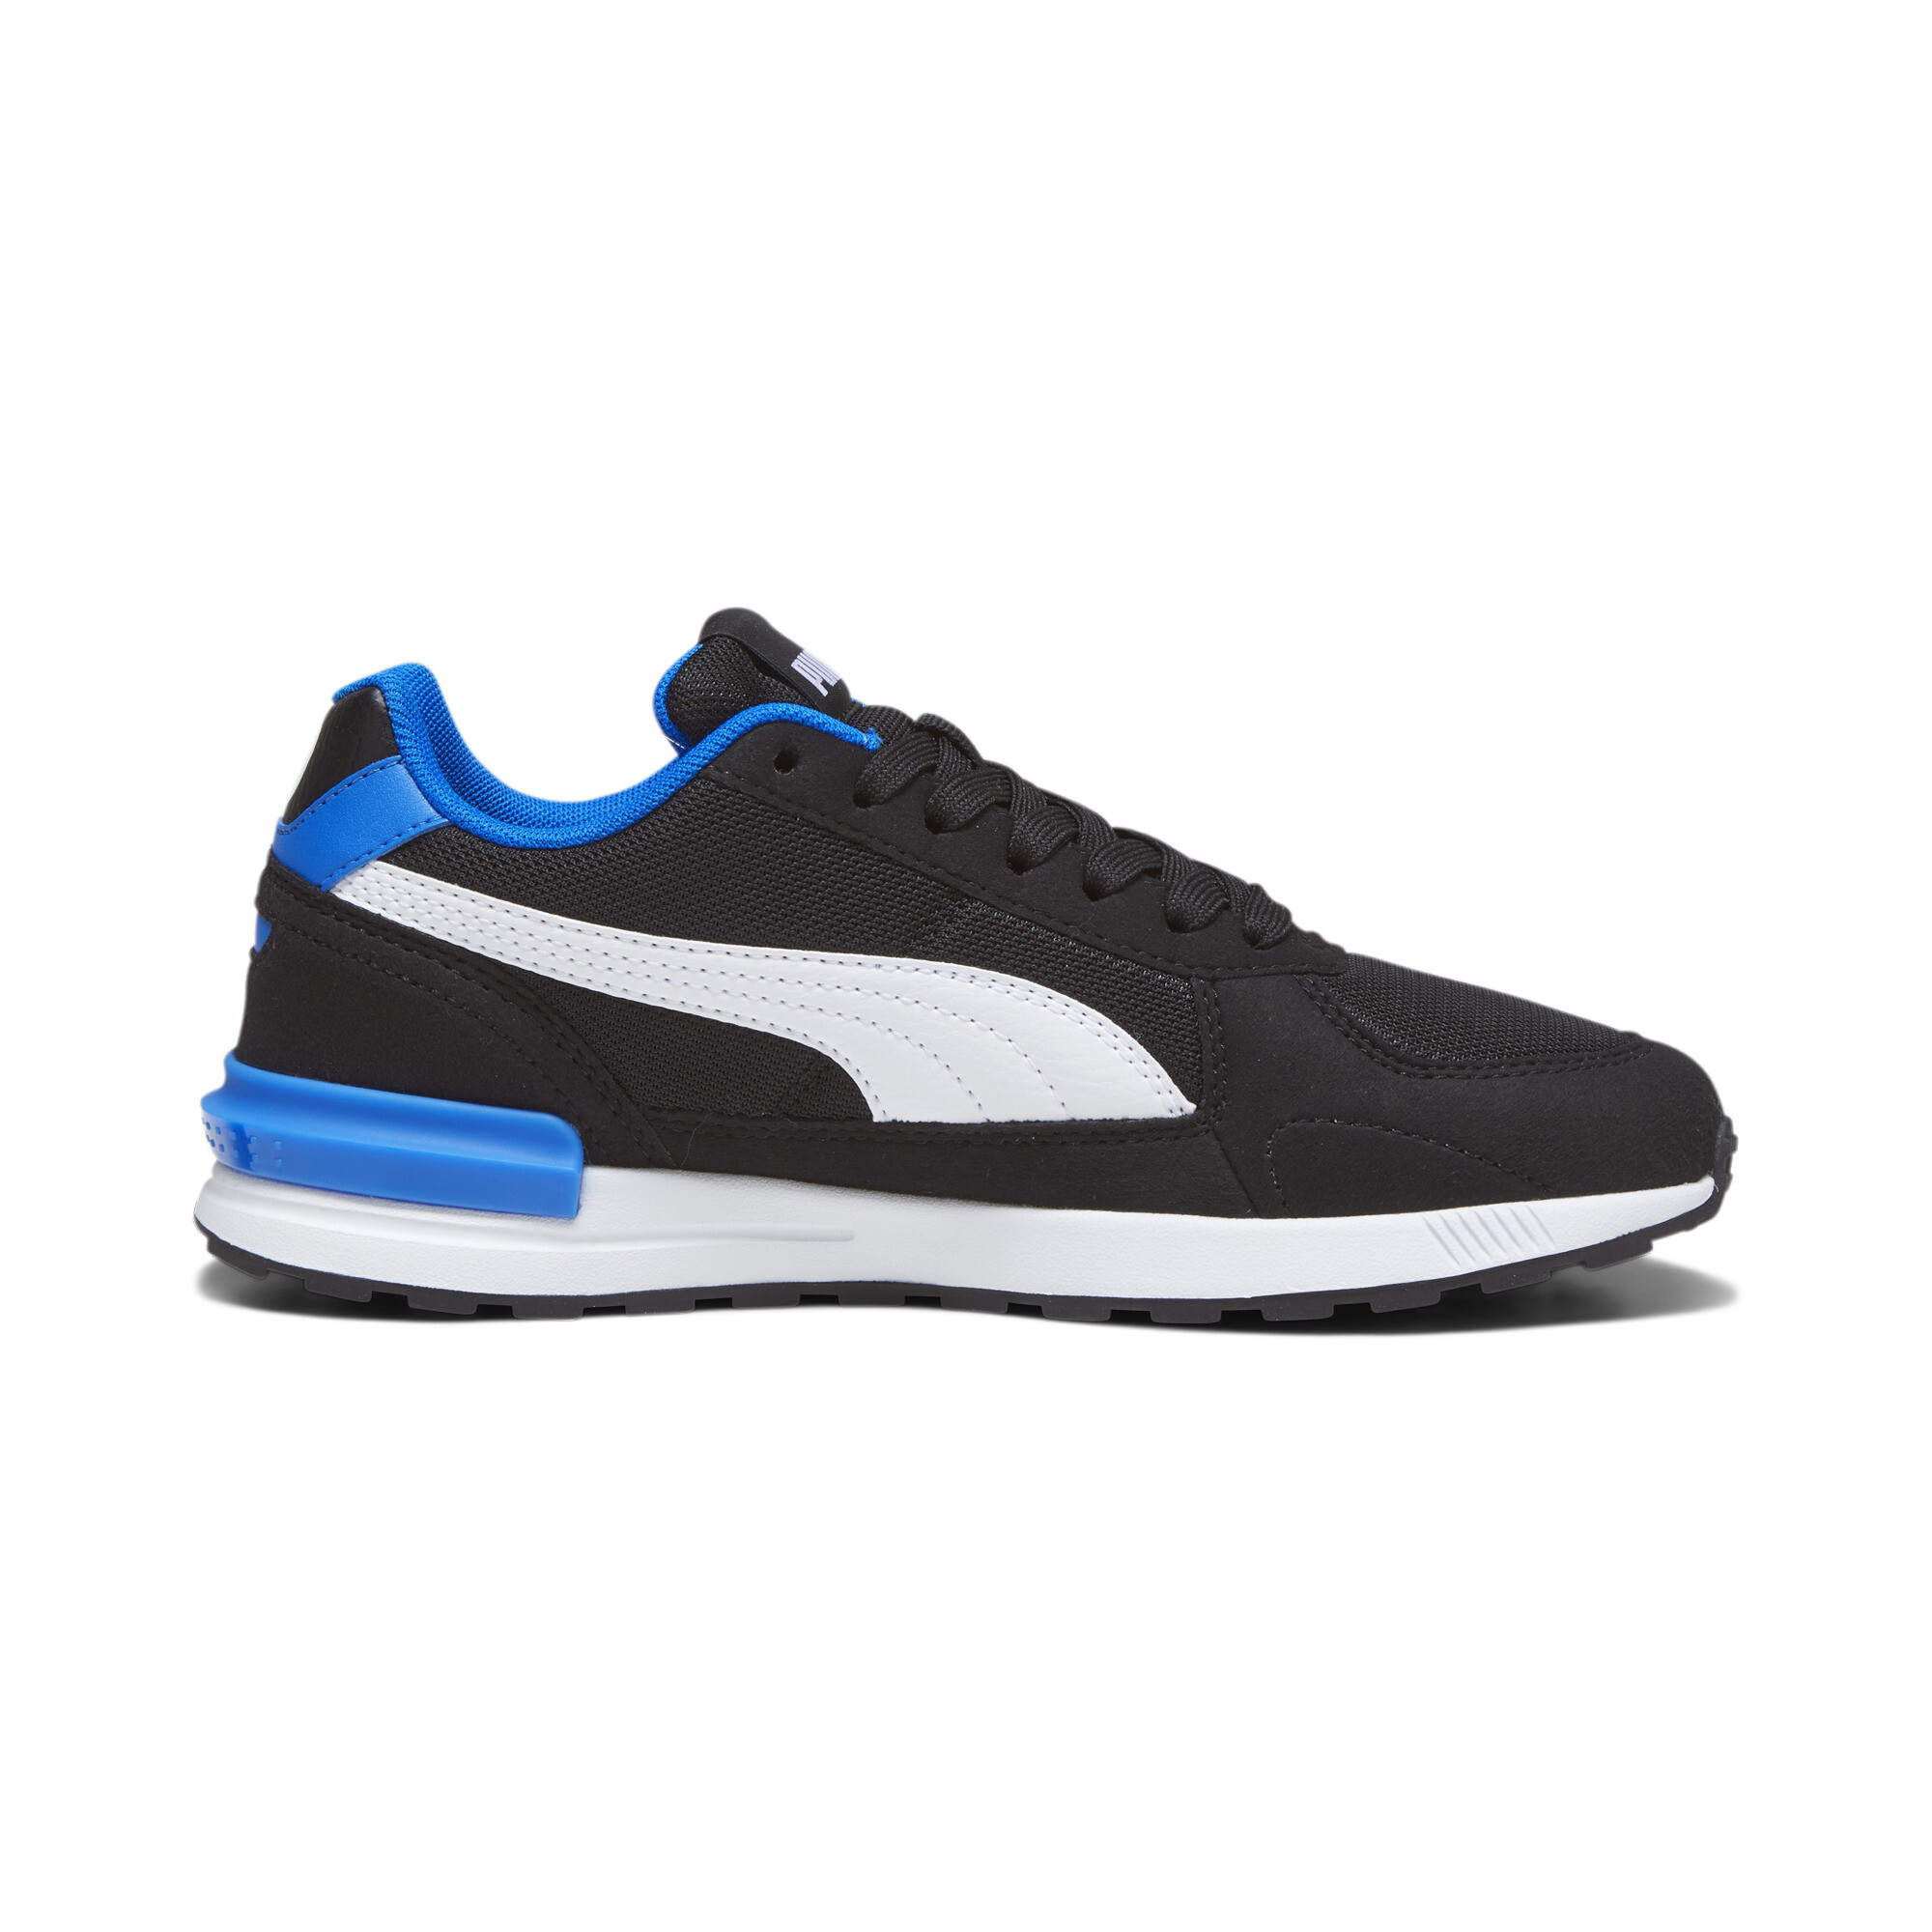 Puma Graviton Youth Trainers, Black, Size 38.5, Shoes